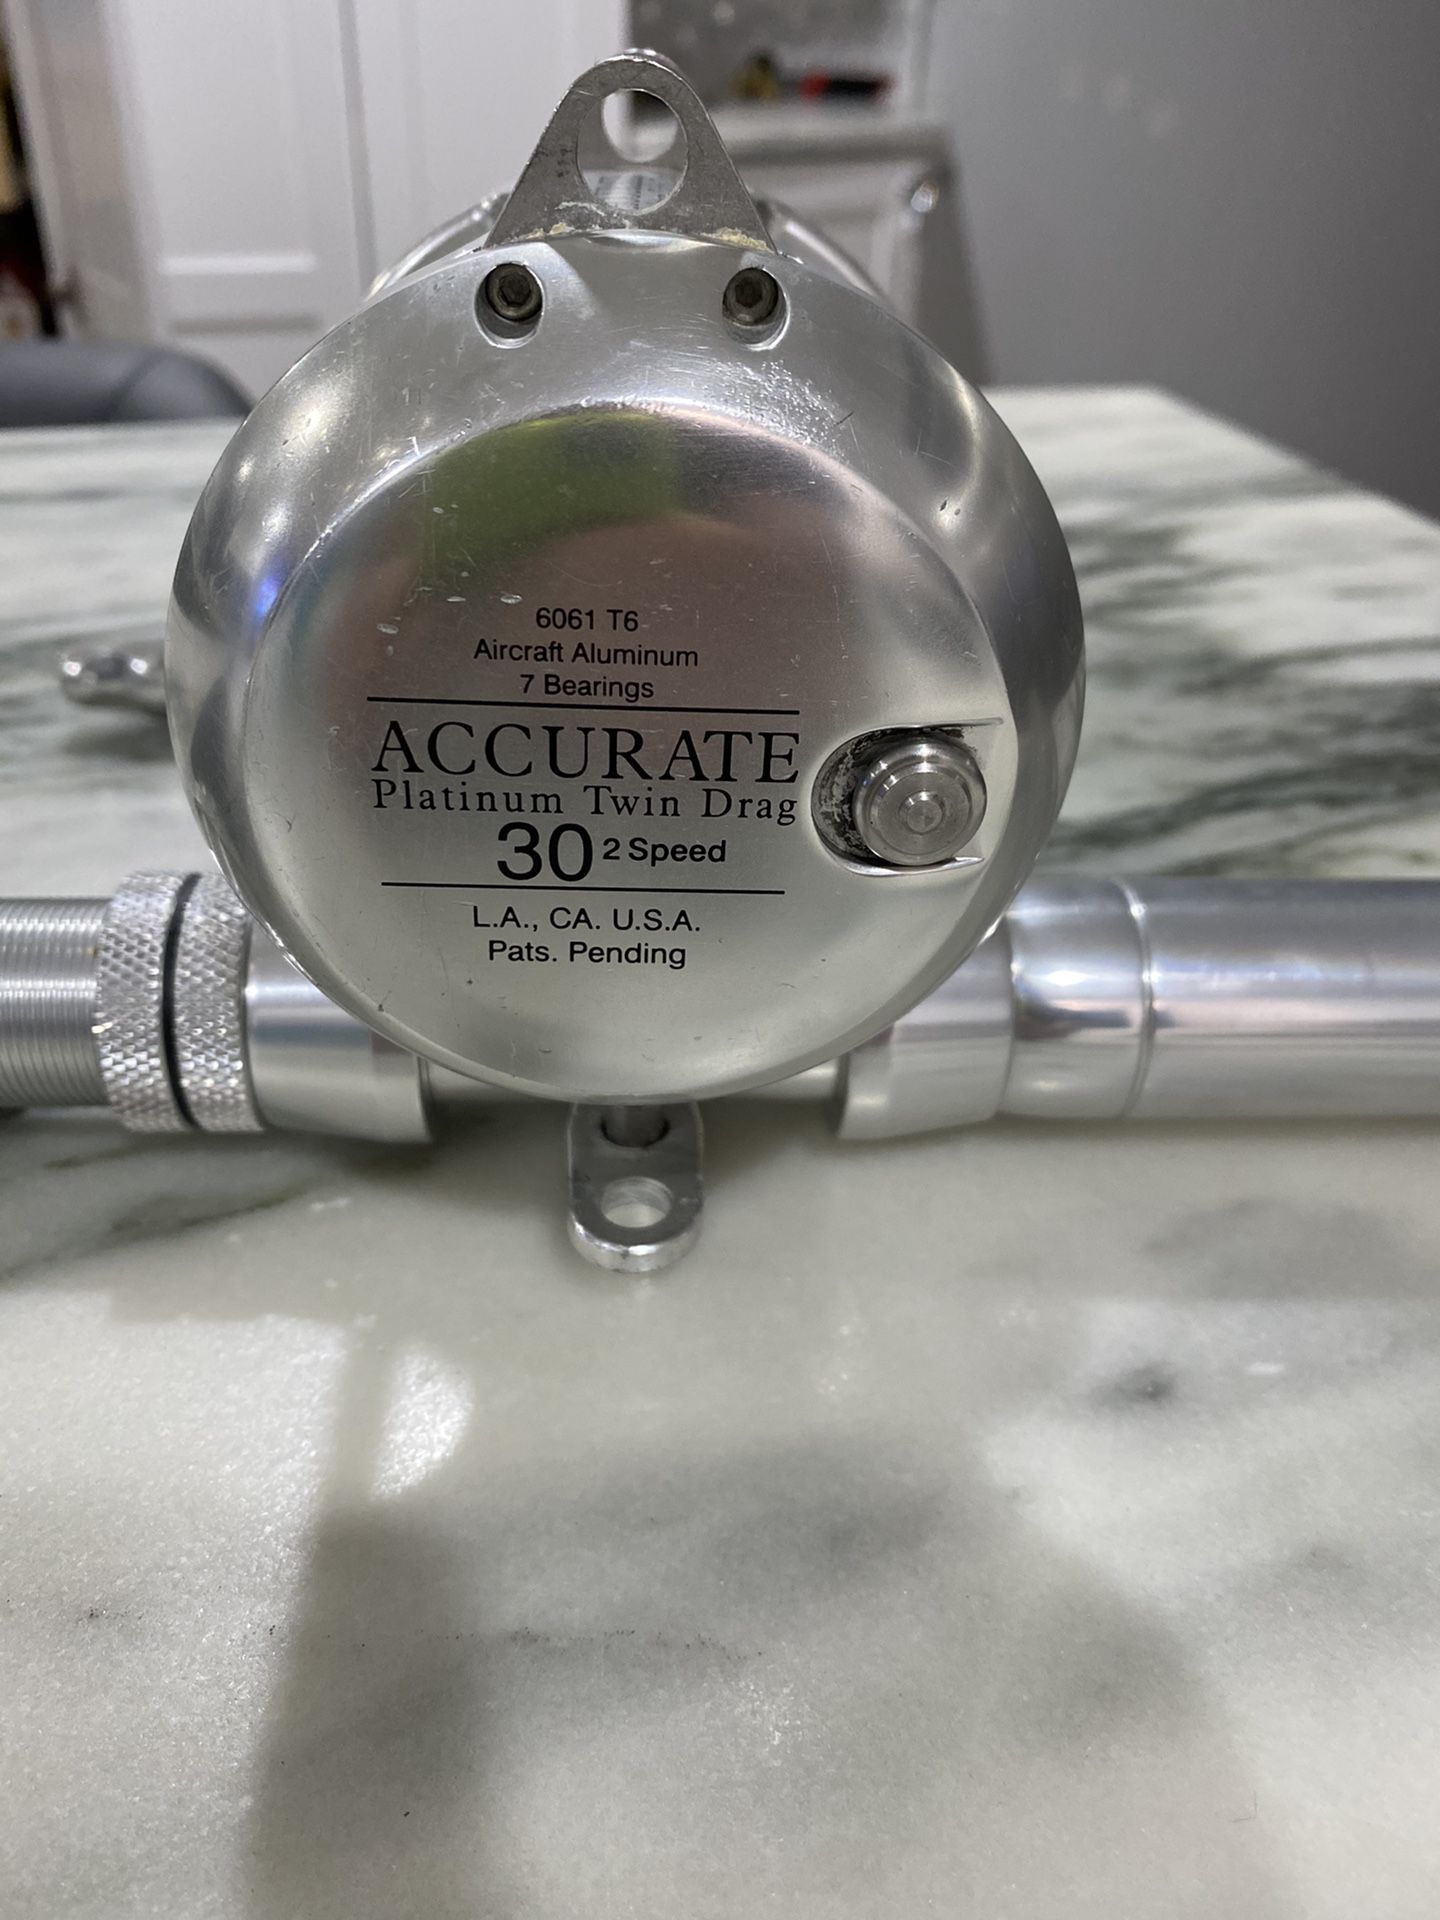 Accurate reel and rod combo - 2 for sale